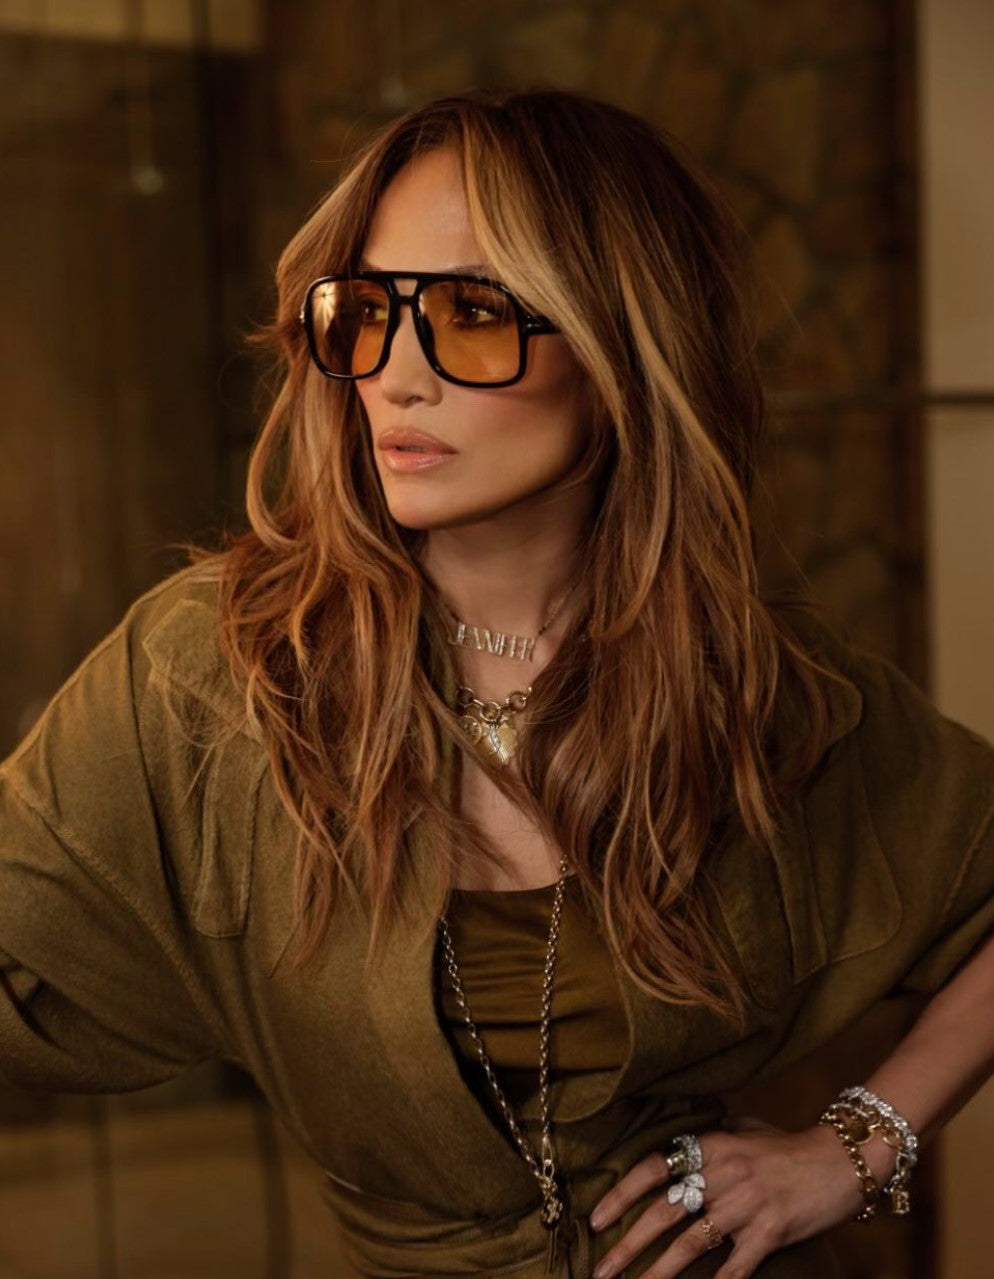 JLo Sunglasses: A at her collection – Banton Frameworks